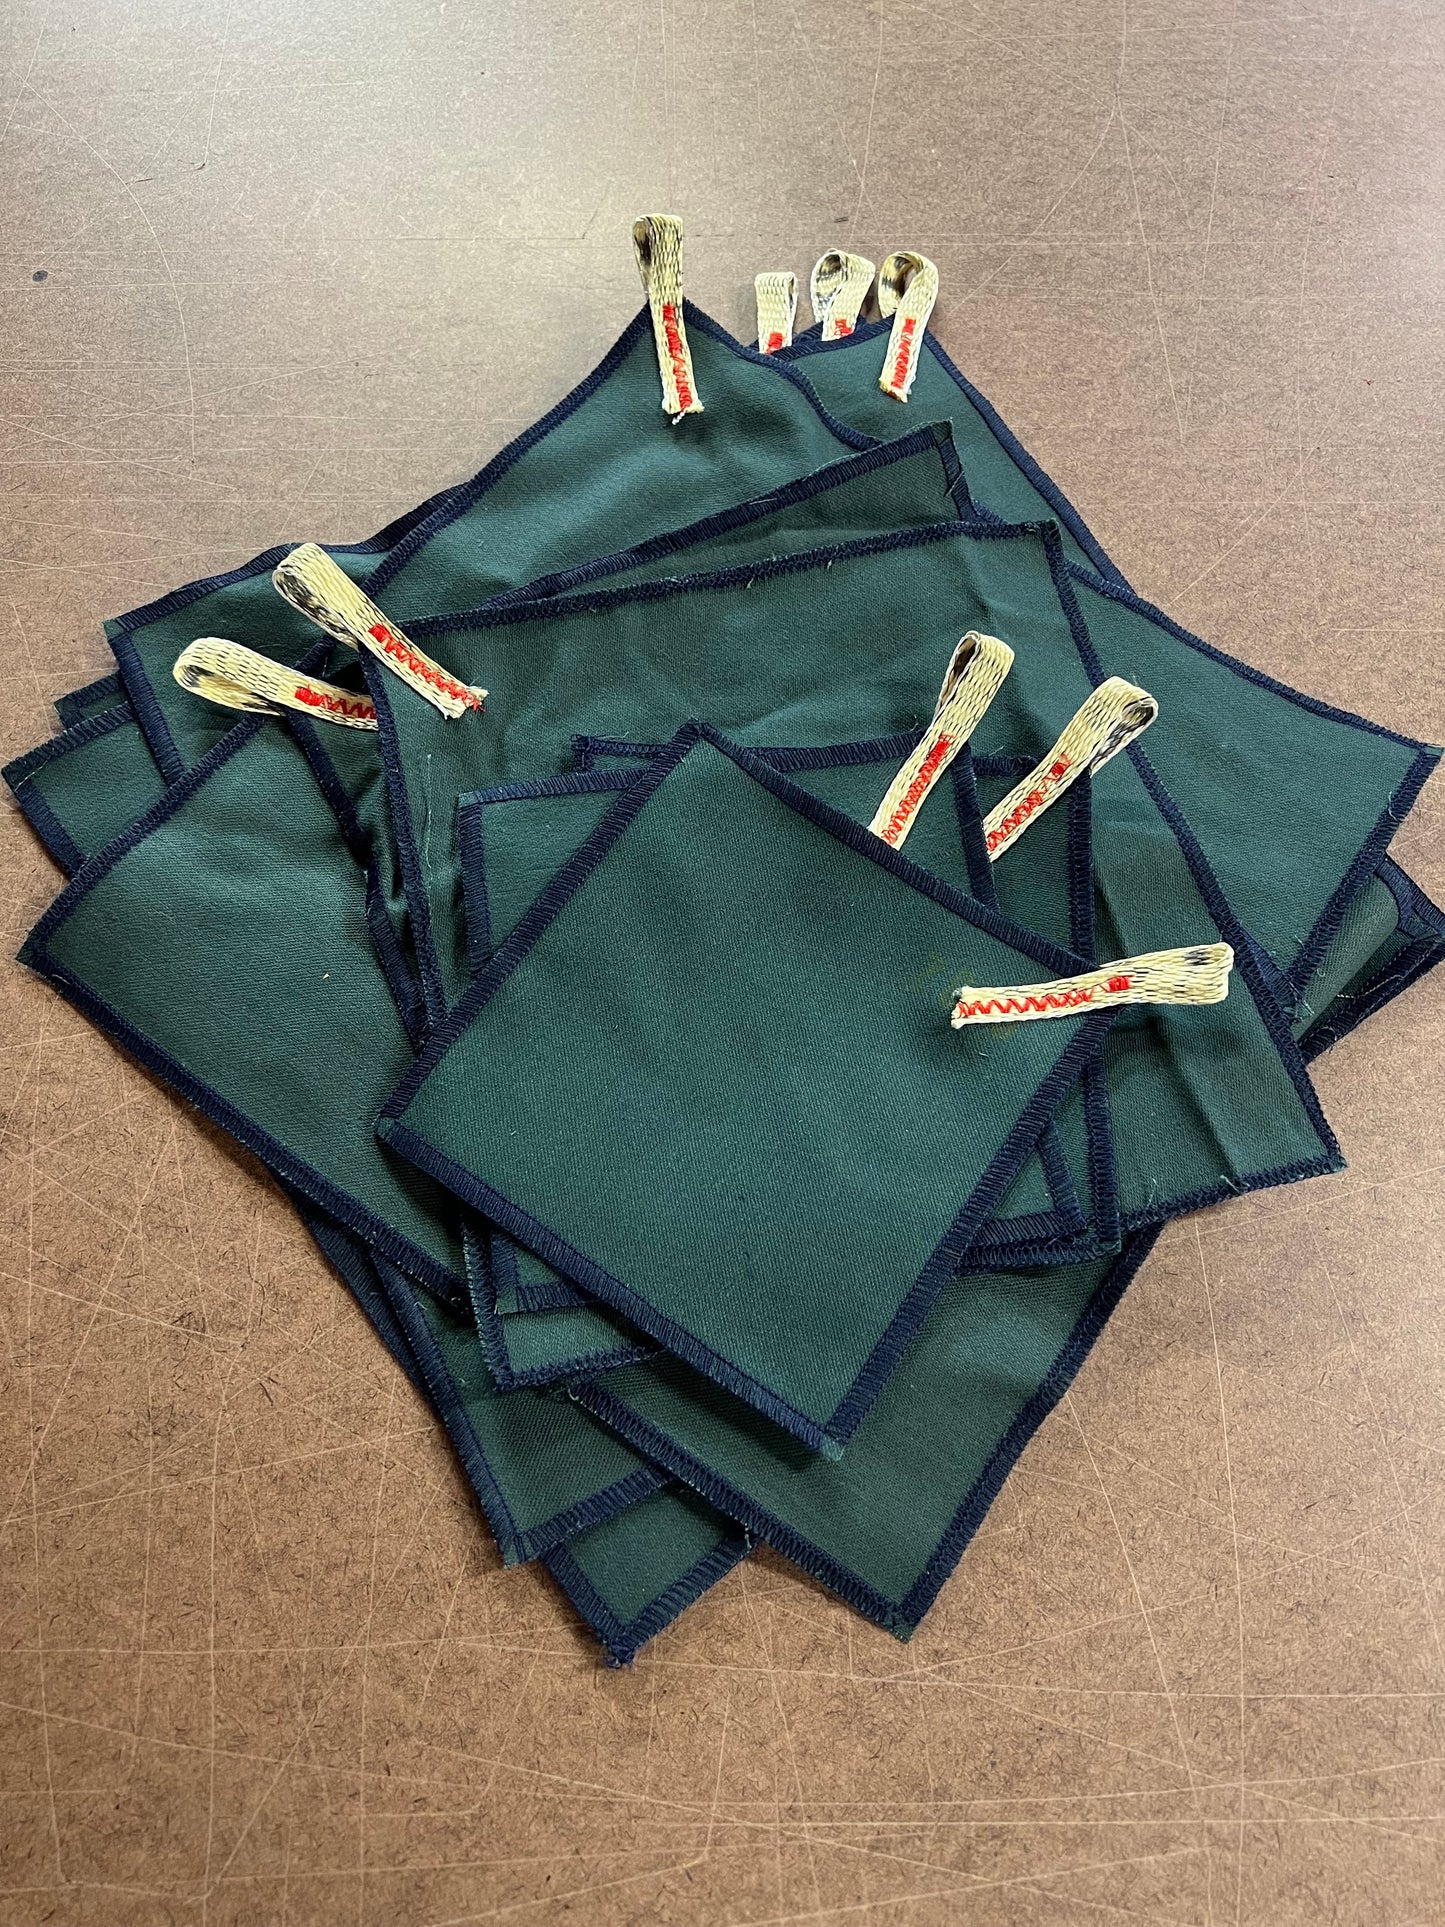 24x24 Nomex Fire Blanket